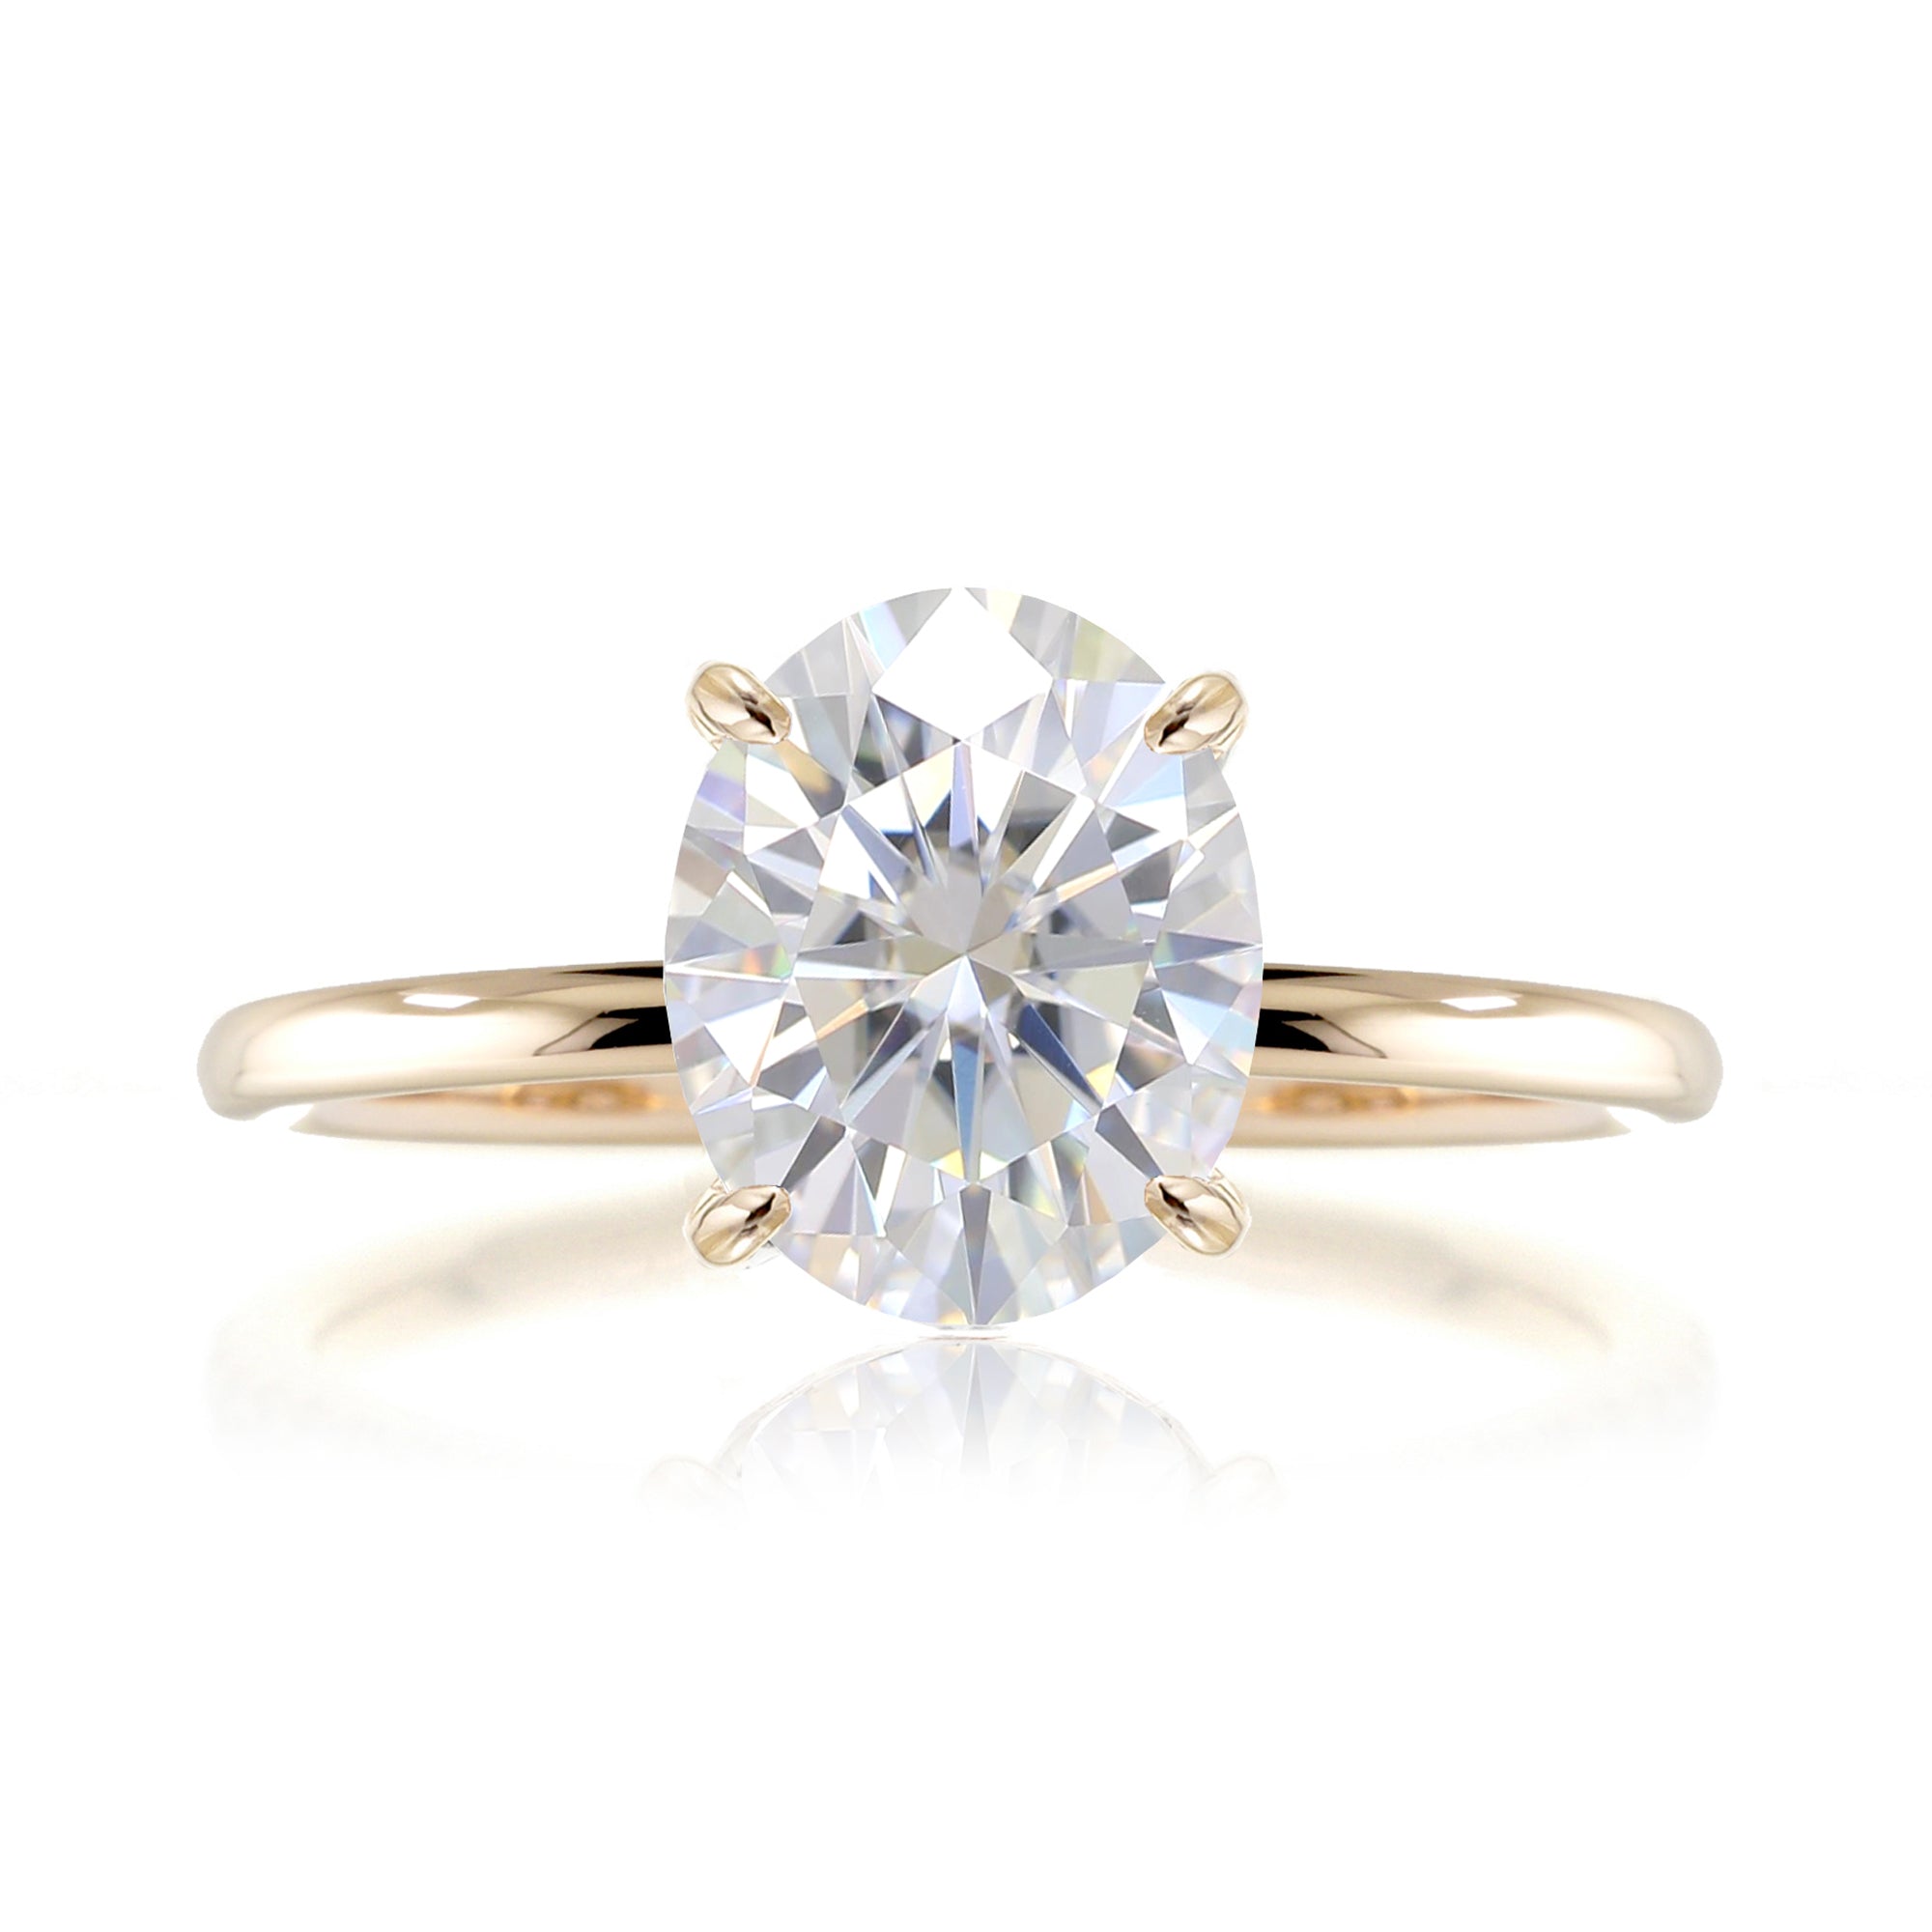 Oval cut moissanite solid band engagement ring yellow gold - The Ava